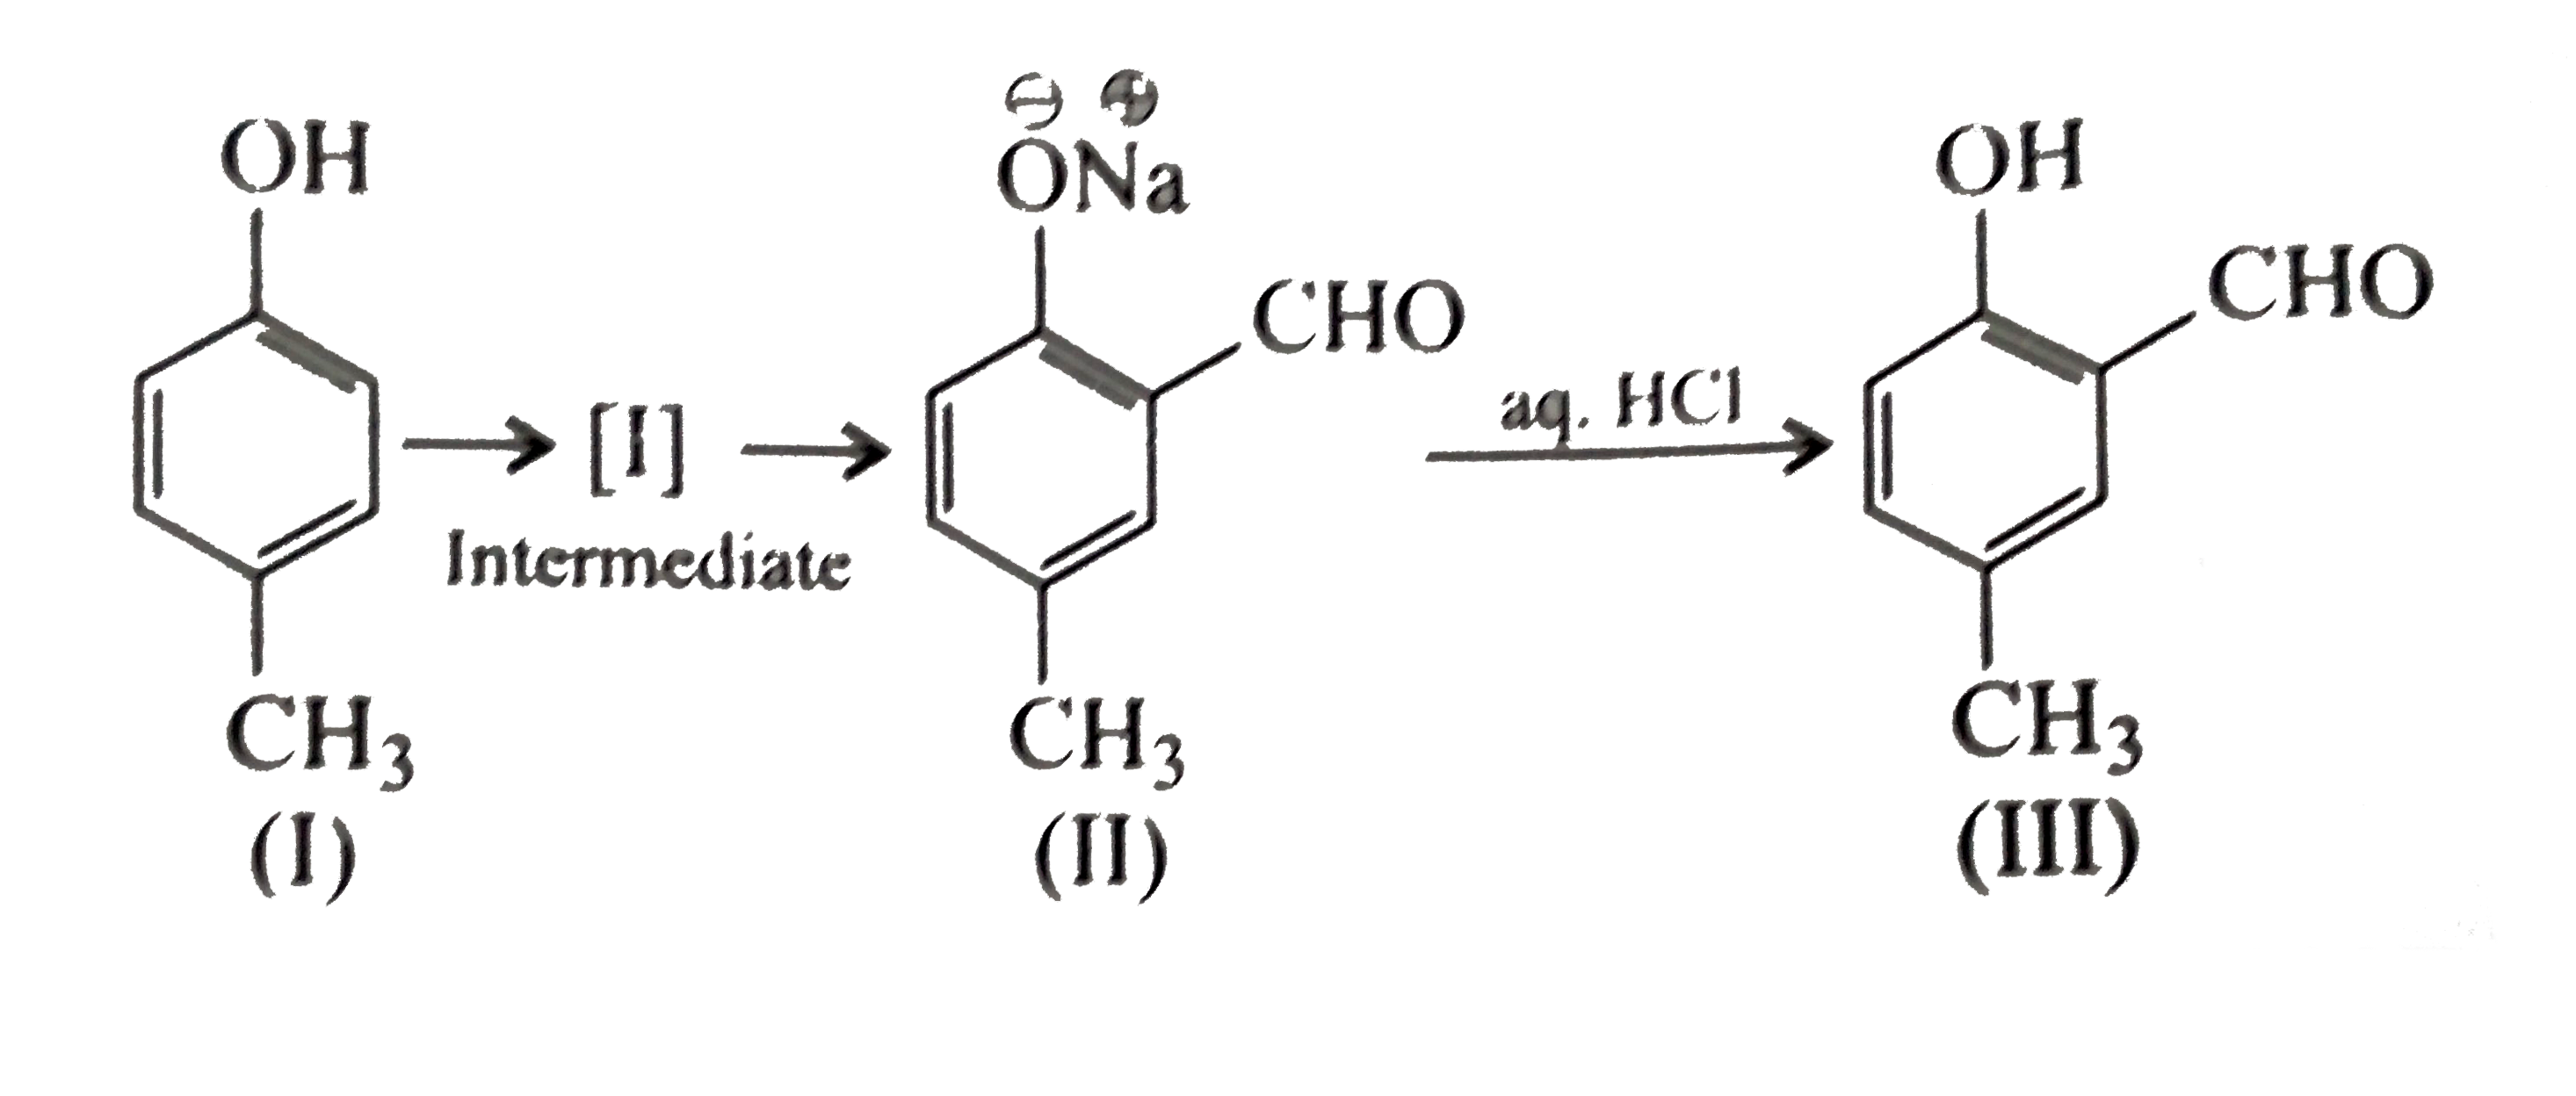 Reimer-Tiemann reaction introduces an aldehyde group on to the aromatic ring of phenol, ortho to the hydroxyl group. This reacrtion involves electrophilic aromatic subsititution. It is a general method for the synthesis of subsituted salicyladehydes as depiced below:      The structure of the intremediate (I) is: